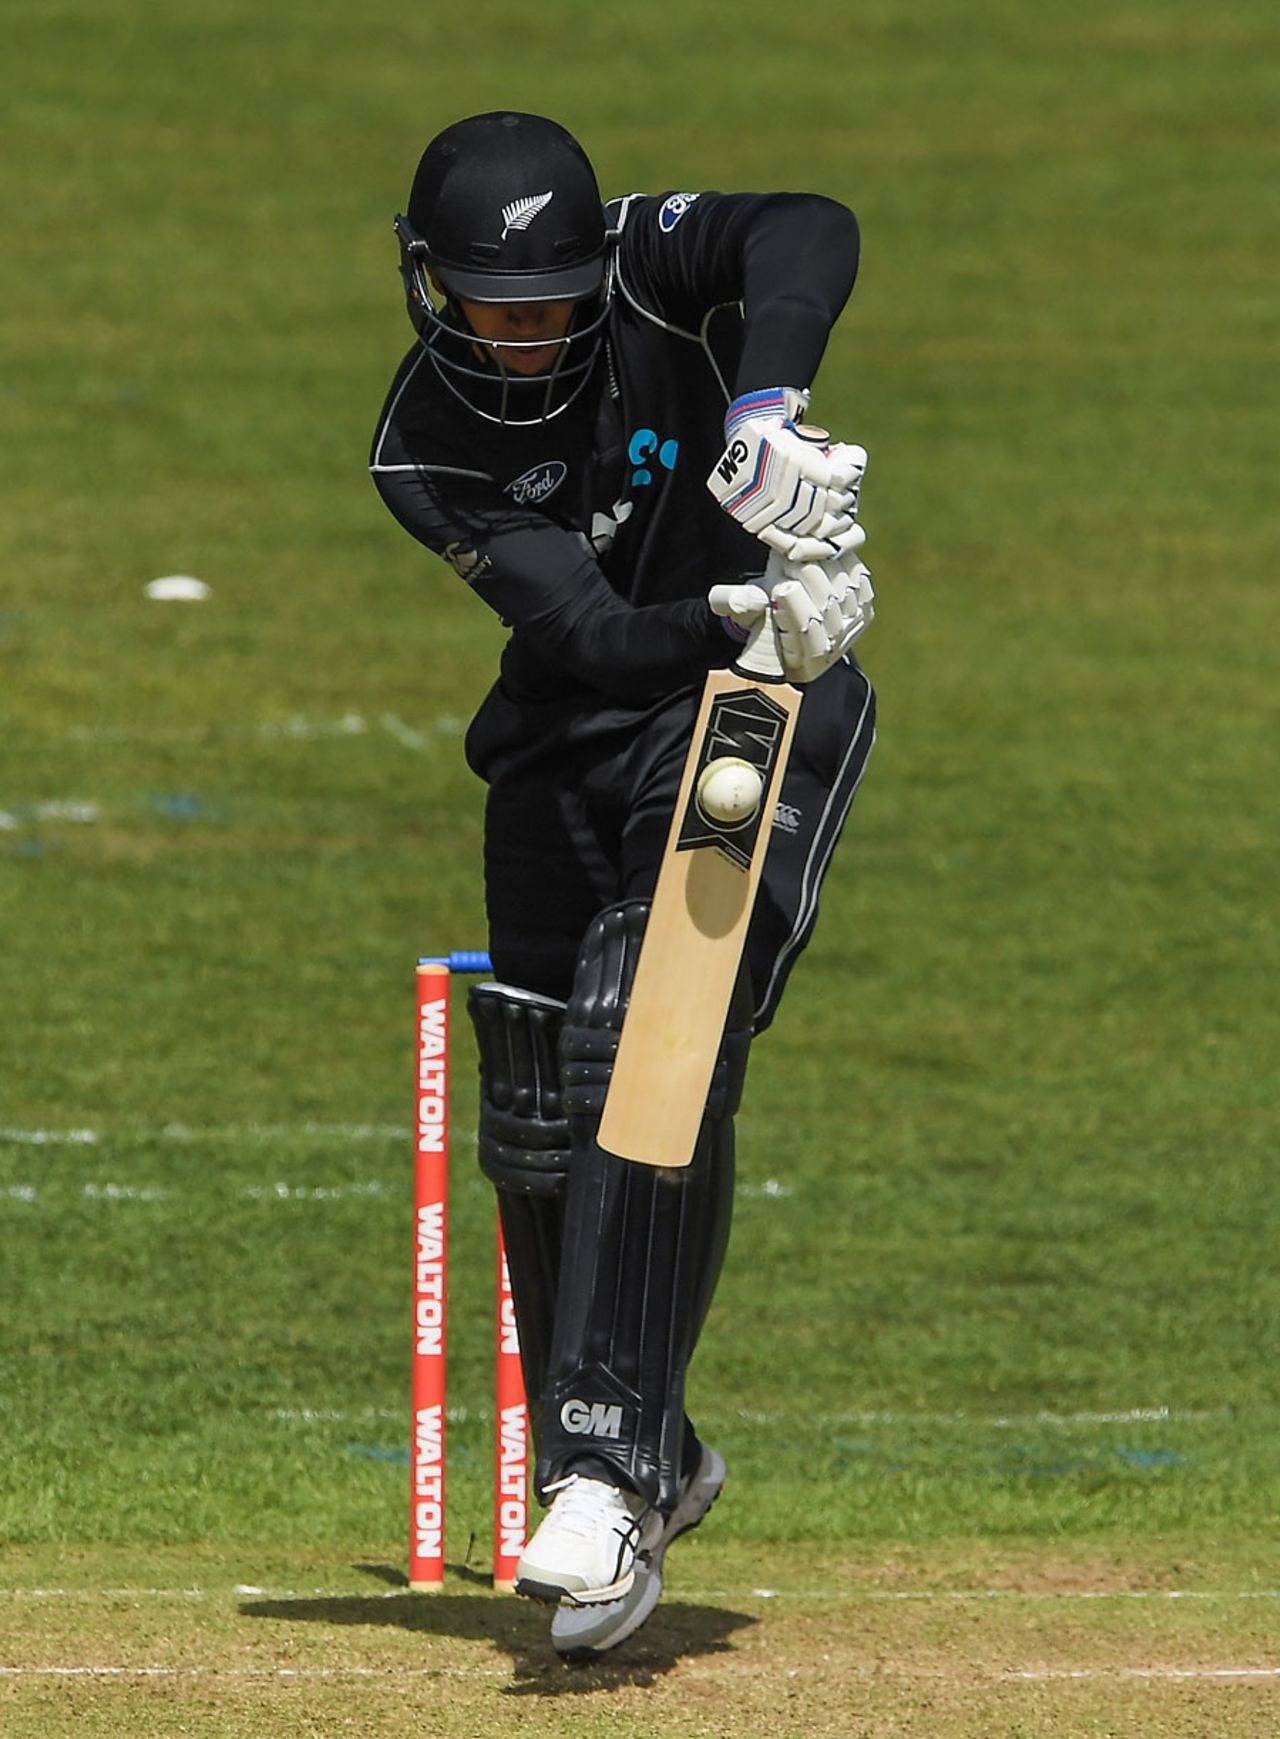 Ross Taylor gets behind the line, Ireland v New Zealand, Tri-nations series, 2nd match, Malahide, May 14, 2017